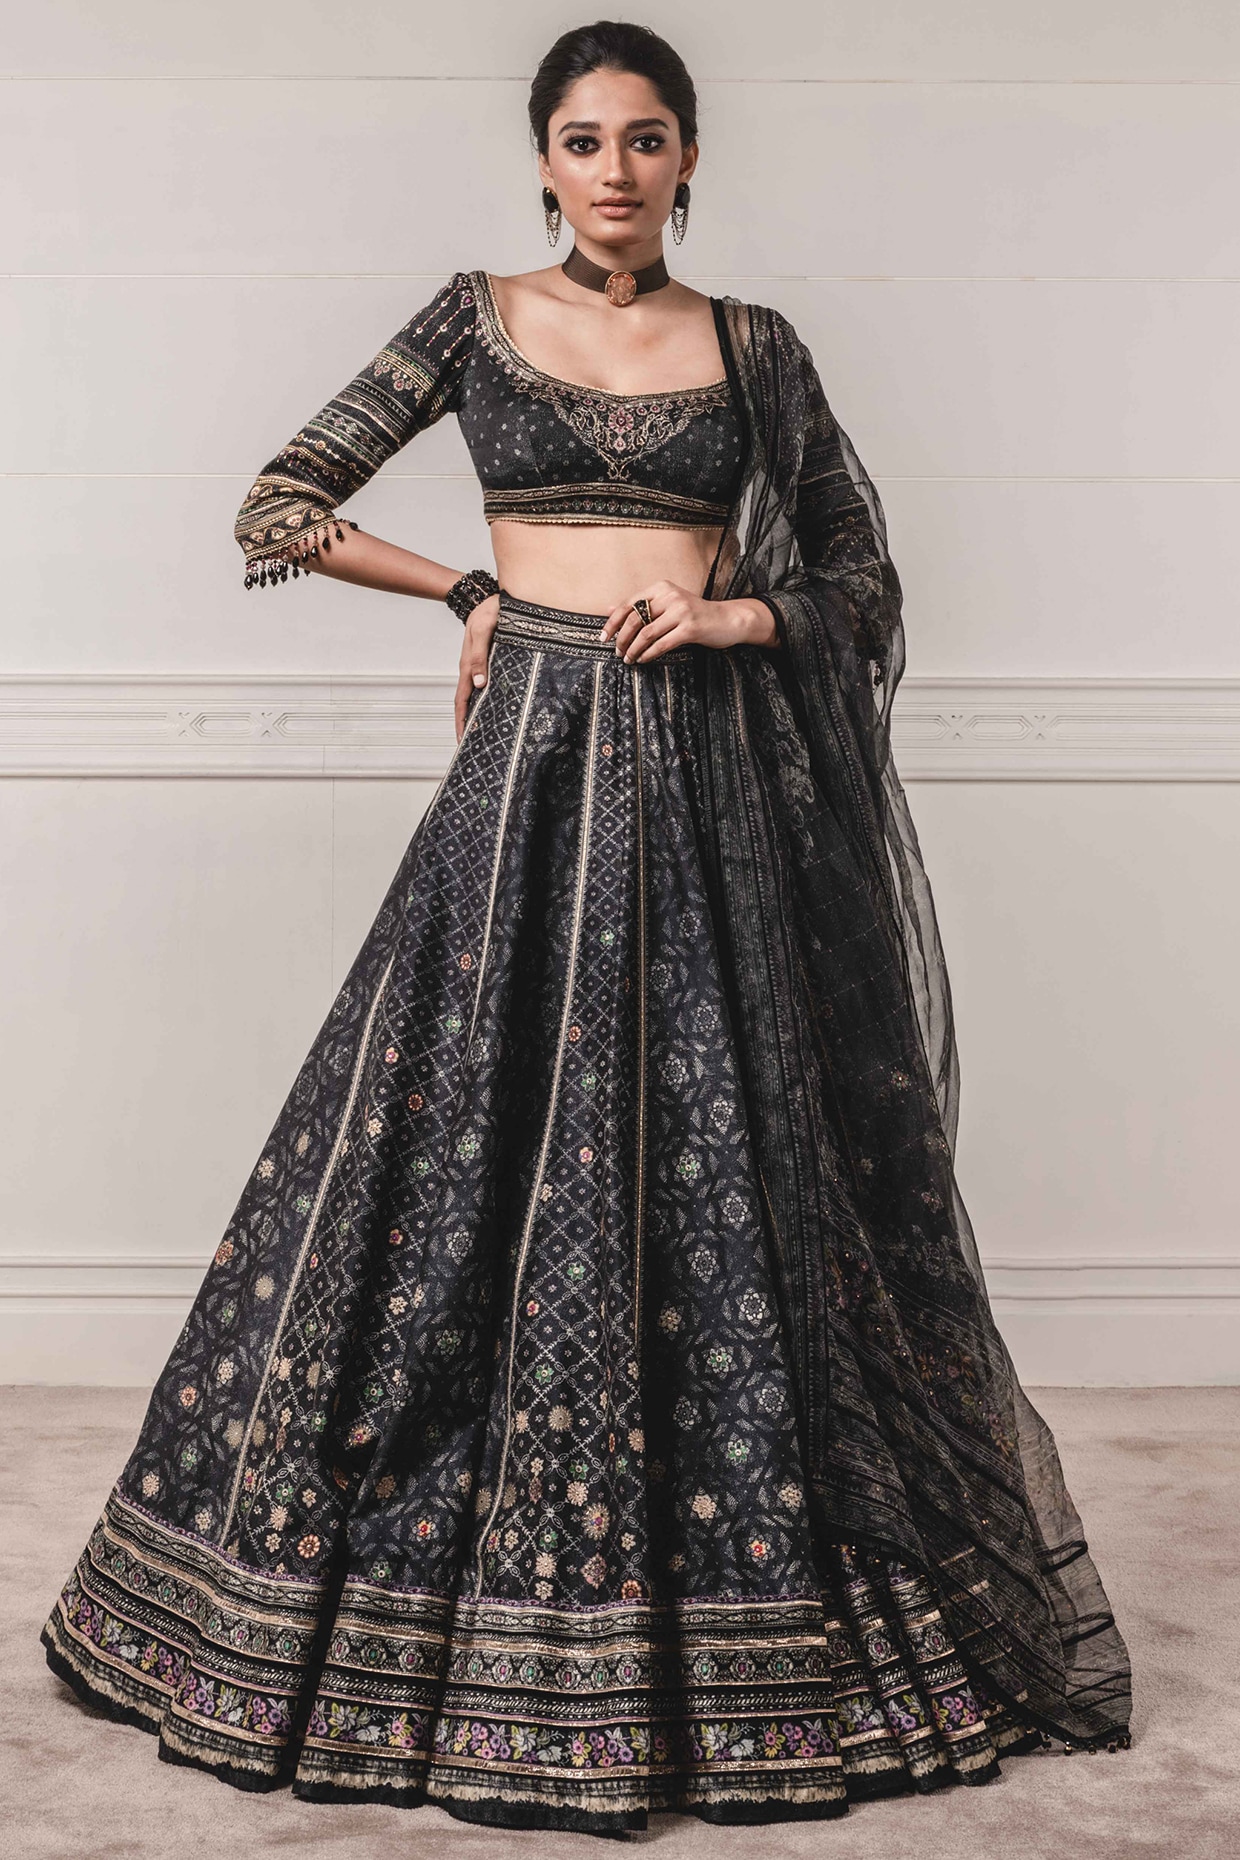 Tarun Tahiliani Unveils his Latest Collection and You Cannot Miss it! |  Bridal Wear | Wedding Blog